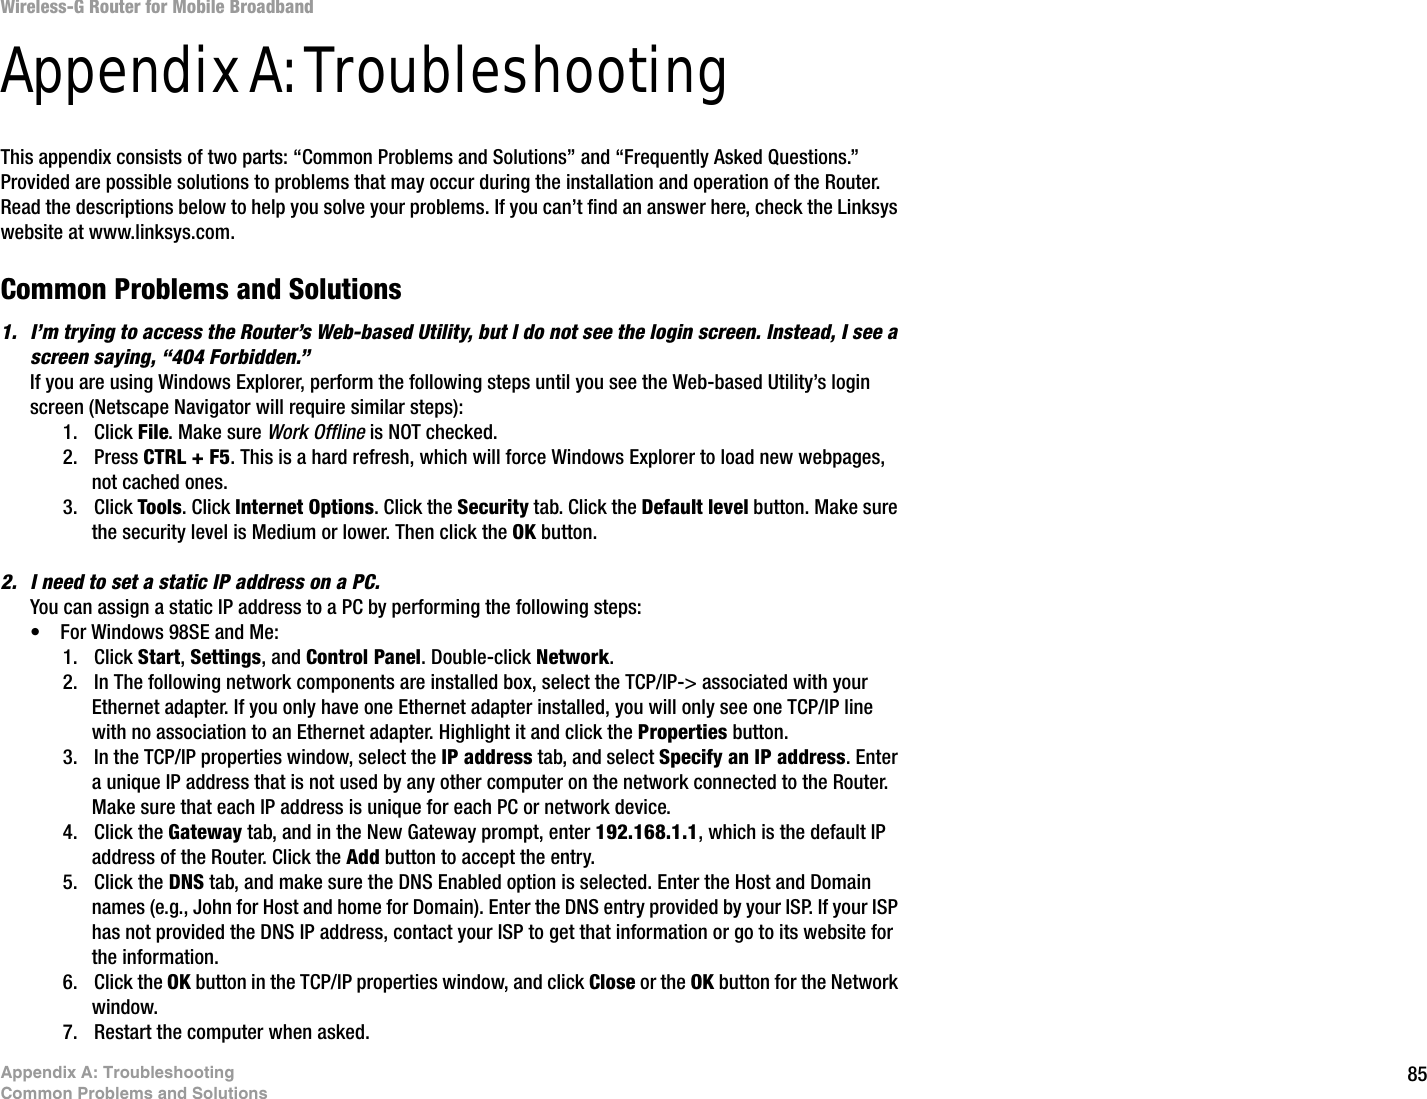 85Appendix A: TroubleshootingCommon Problems and SolutionsWireless-G Router for Mobile BroadbandAppendix A: TroubleshootingThis appendix consists of two parts: “Common Problems and Solutions” and “Frequently Asked Questions.” Provided are possible solutions to problems that may occur during the installation and operation of the Router. Read the descriptions below to help you solve your problems. If you can’t find an answer here, check the Linksys website at www.linksys.com.Common Problems and Solutions1. I’m trying to access the Router’s Web-based Utility, but I do not see the login screen. Instead, I see a screen saying, “404 Forbidden.”If you are using Windows Explorer, perform the following steps until you see the Web-based Utility’s login screen (Netscape Navigator will require similar steps):1. Click File. Make sure Work Offline is NOT checked.2. Press CTRL + F5. This is a hard refresh, which will force Windows Explorer to load new webpages, not cached ones.3. Click Tools. Click Internet Options. Click the Security tab. Click the Default level button. Make sure the security level is Medium or lower. Then click the OK button.2. I need to set a static IP address on a PC.You can assign a static IP address to a PC by performing the following steps:• For Windows 98SE and Me:1. Click Start, Settings, and Control Panel. Double-click Network.2. In The following network components are installed box, select the TCP/IP-&gt; associated with your Ethernet adapter. If you only have one Ethernet adapter installed, you will only see one TCP/IP line with no association to an Ethernet adapter. Highlight it and click the Properties button.3. In the TCP/IP properties window, select the IP address tab, and select Specify an IP address. Enter a unique IP address that is not used by any other computer on the network connected to the Router. Make sure that each IP address is unique for each PC or network device.4. Click the Gateway tab, and in the New Gateway prompt, enter 192.168.1.1, which is the default IP address of the Router. Click the Add button to accept the entry.5. Click the DNS tab, and make sure the DNS Enabled option is selected. Enter the Host and Domain names (e.g., John for Host and home for Domain). Enter the DNS entry provided by your ISP. If your ISP has not provided the DNS IP address, contact your ISP to get that information or go to its website for the information.6. Click the OK button in the TCP/IP properties window, and click Close or the OK button for the Network window.7. Restart the computer when asked.